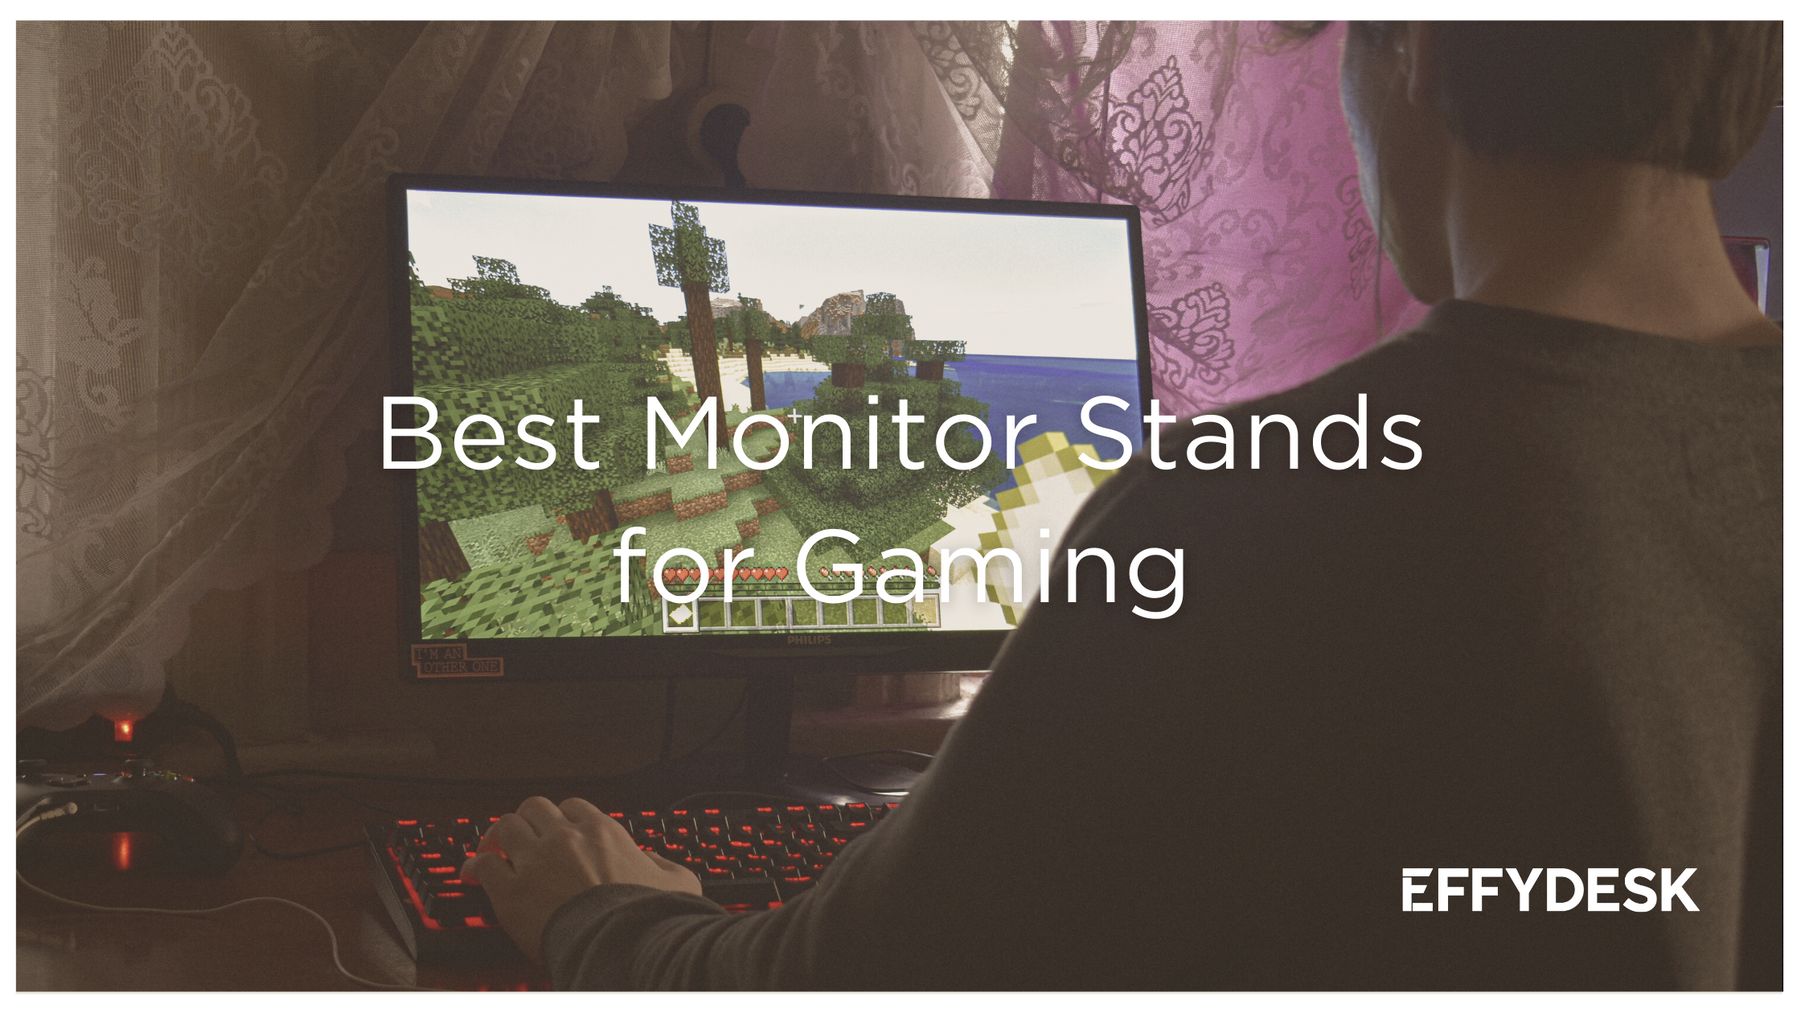 learn more about the best monitor stand for gaming